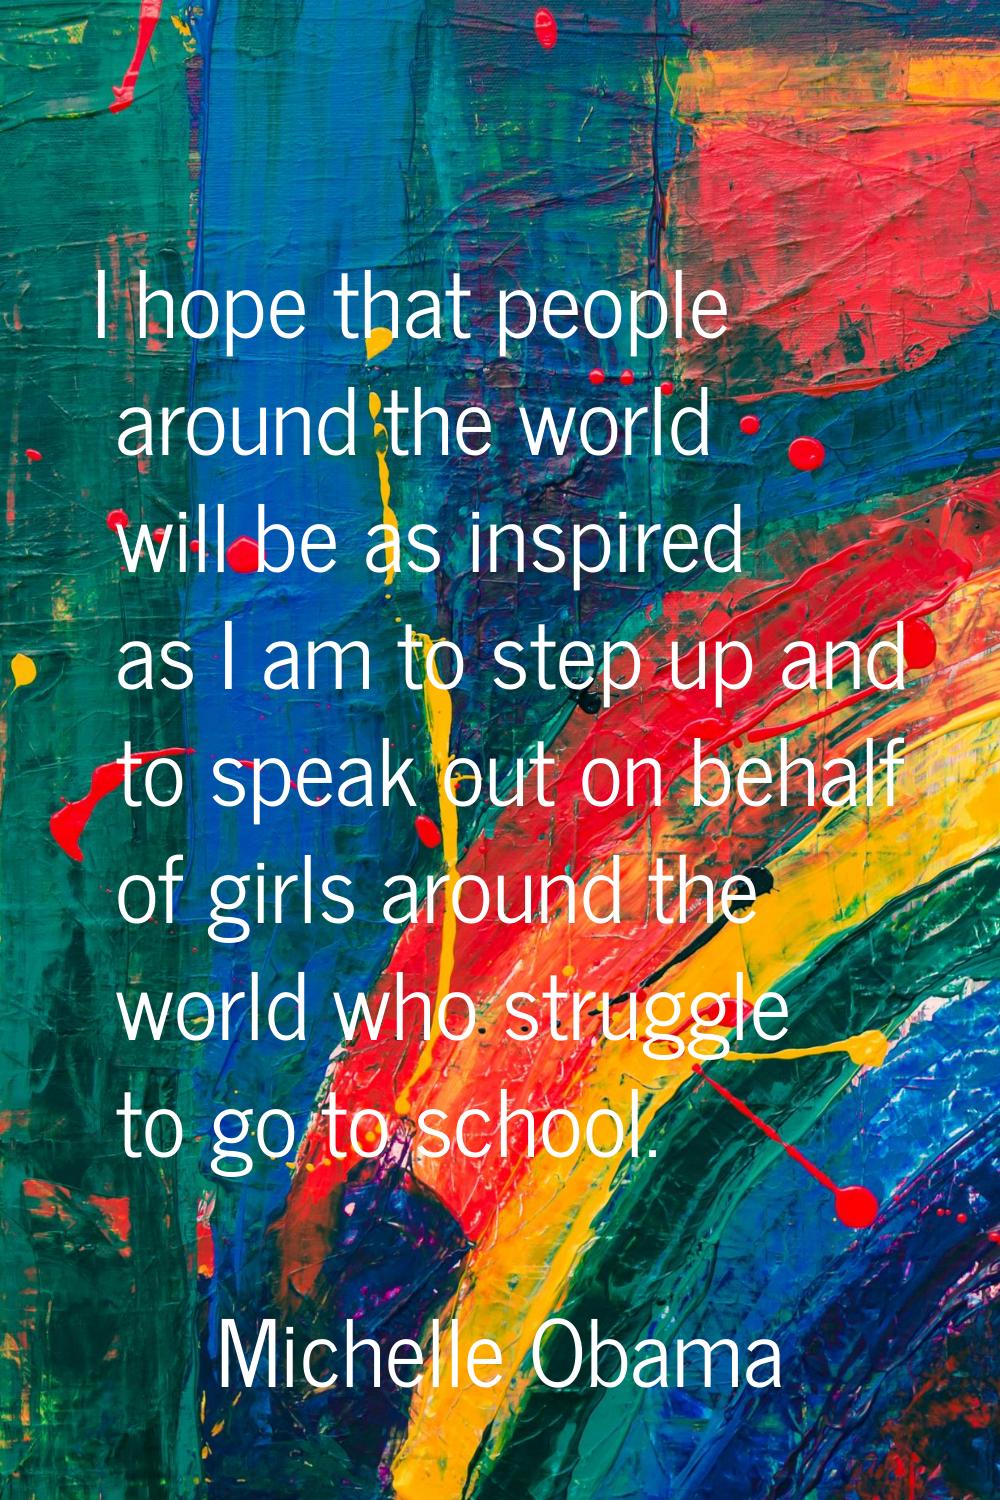 I hope that people around the world will be as inspired as I am to step up and to speak out on beha